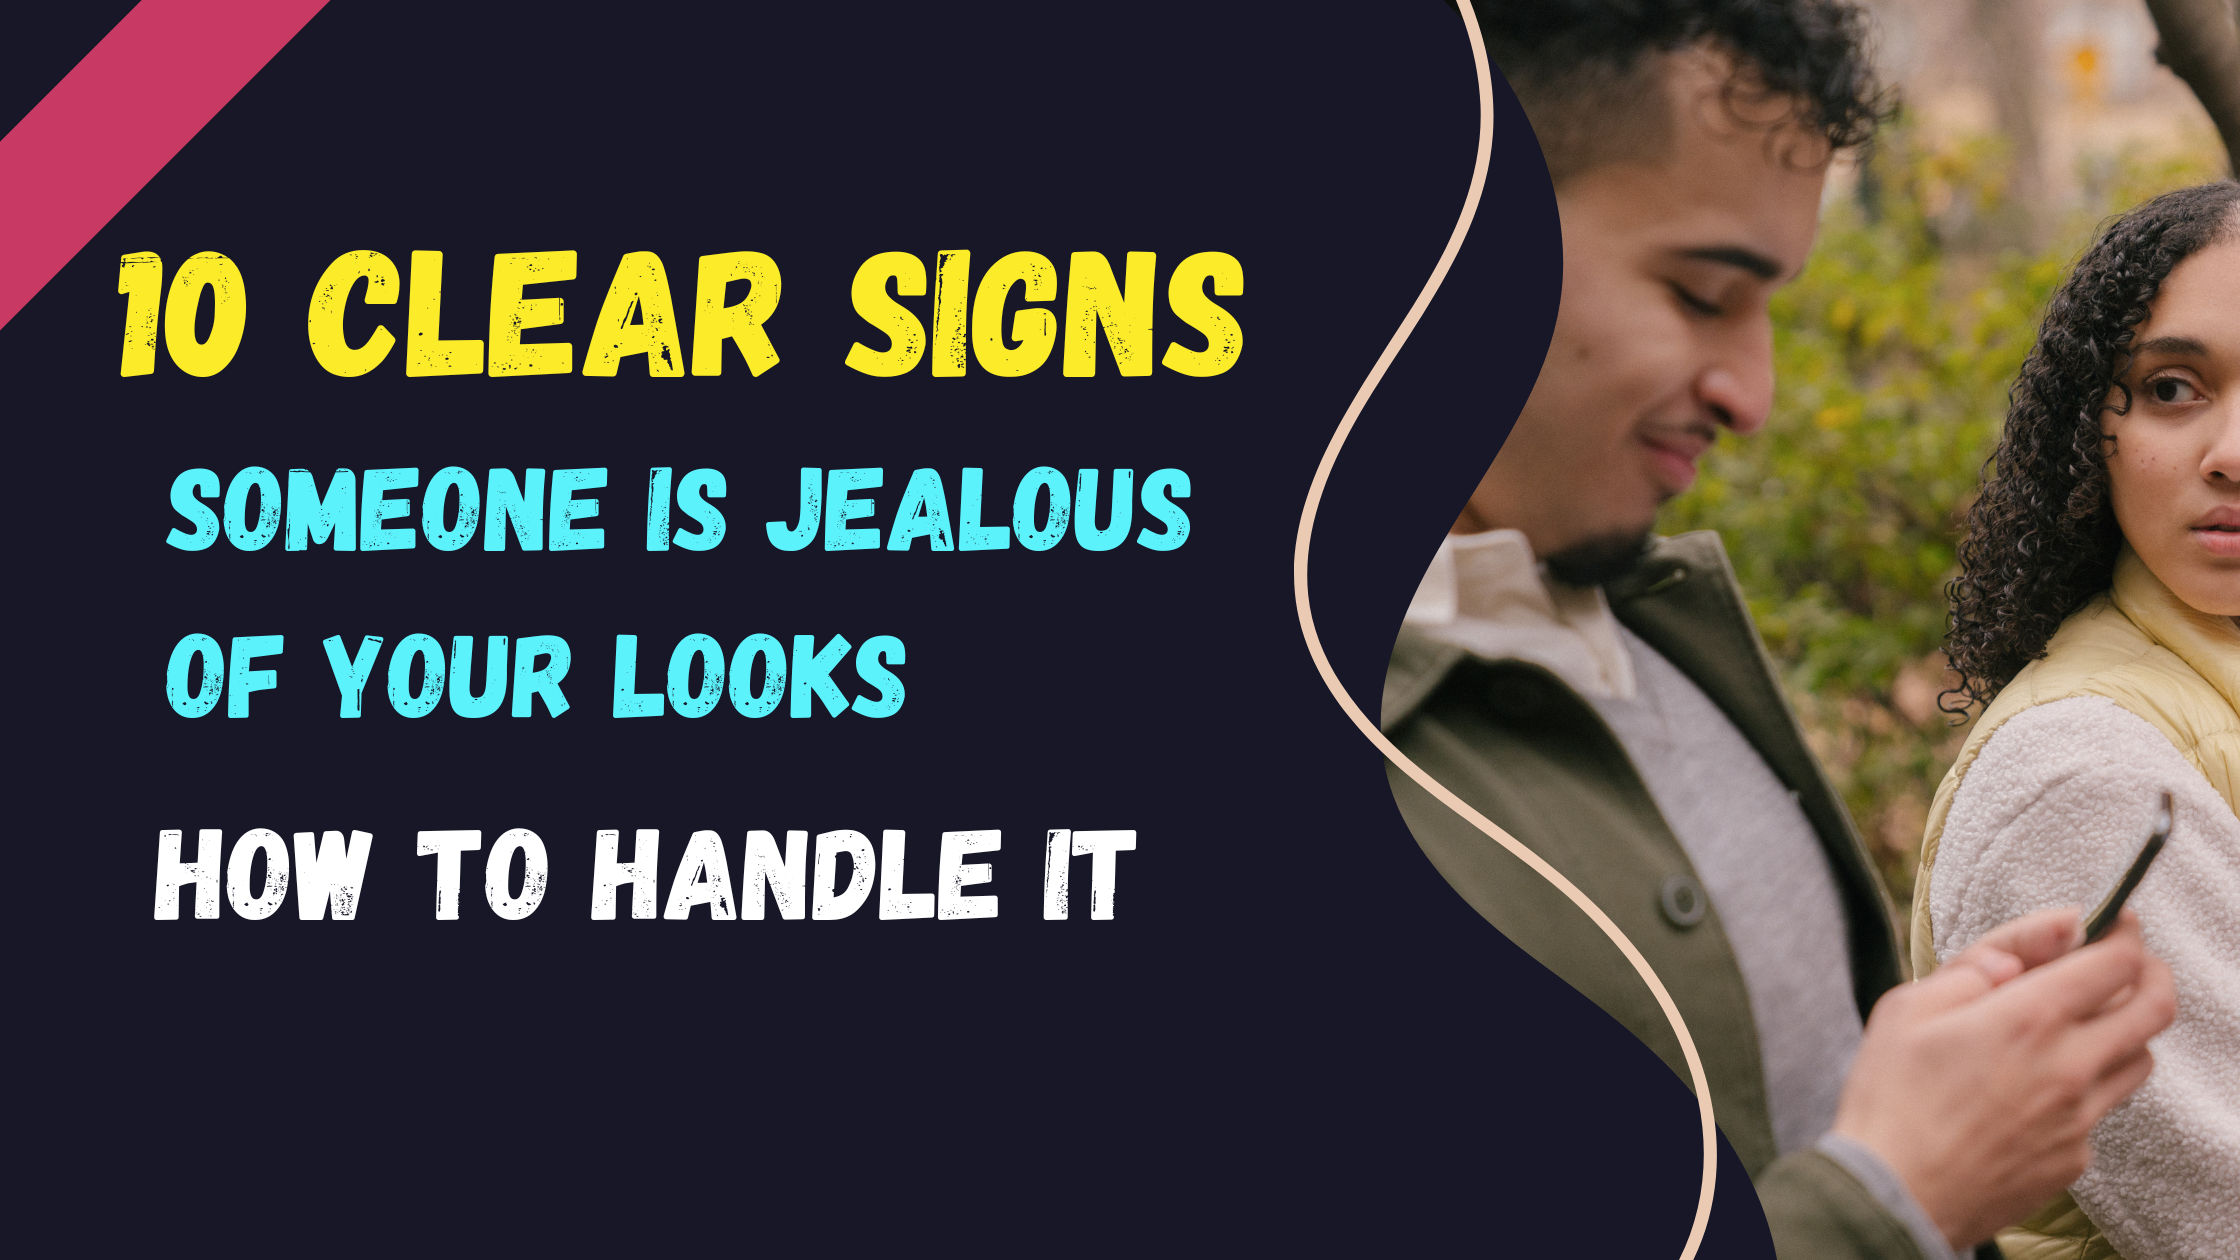 signs someone is jealous of your looks